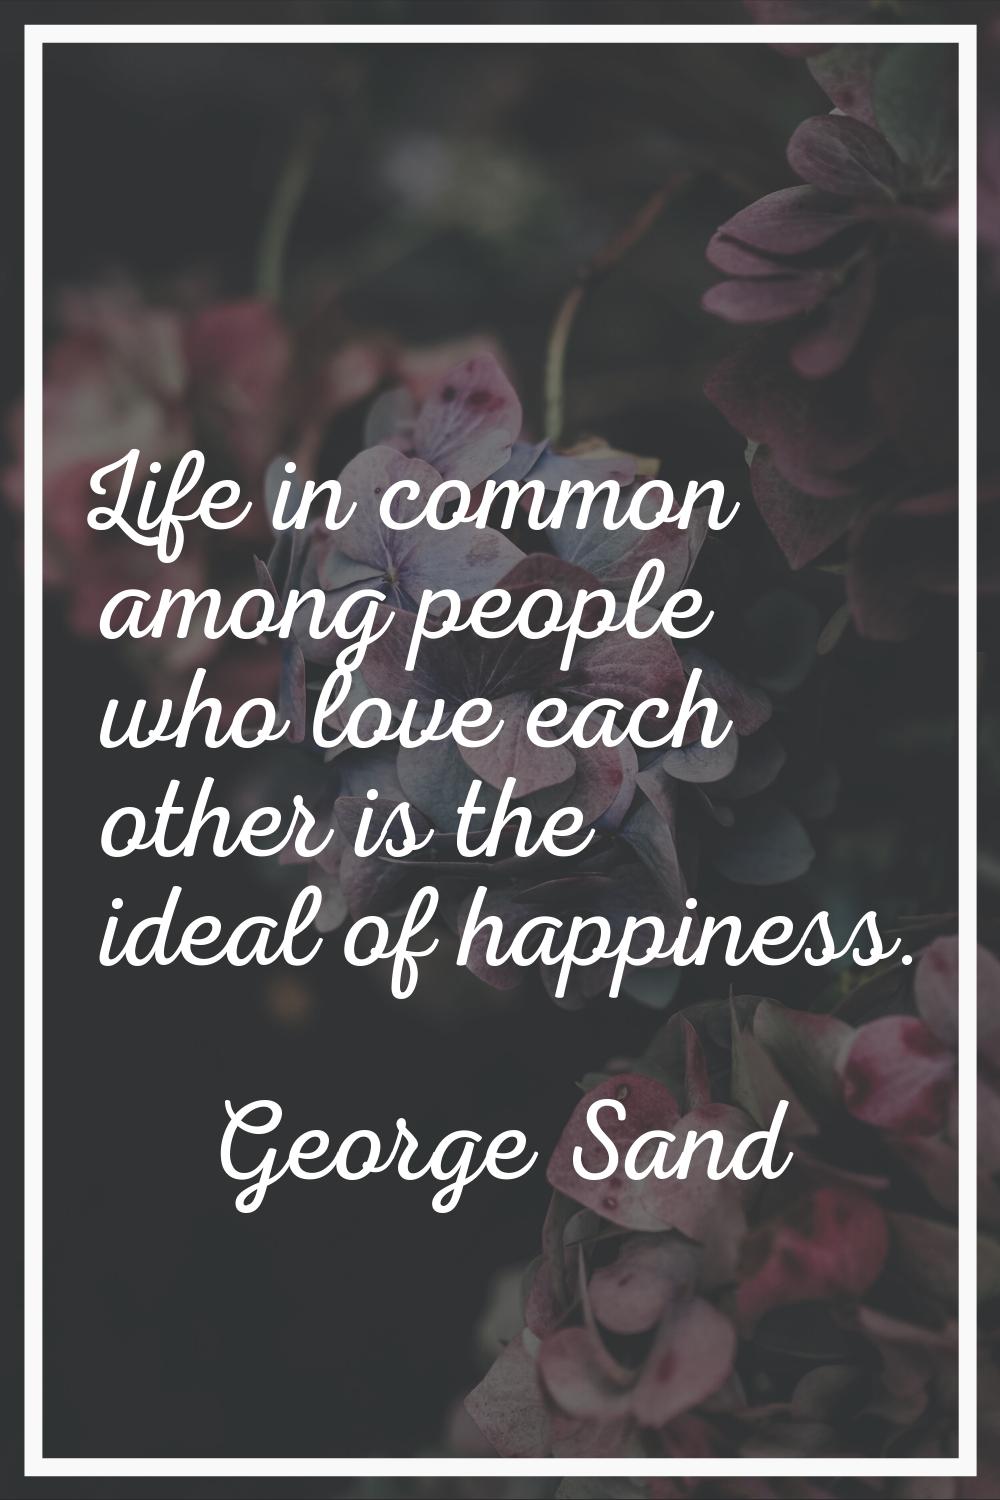 Life in common among people who love each other is the ideal of happiness.